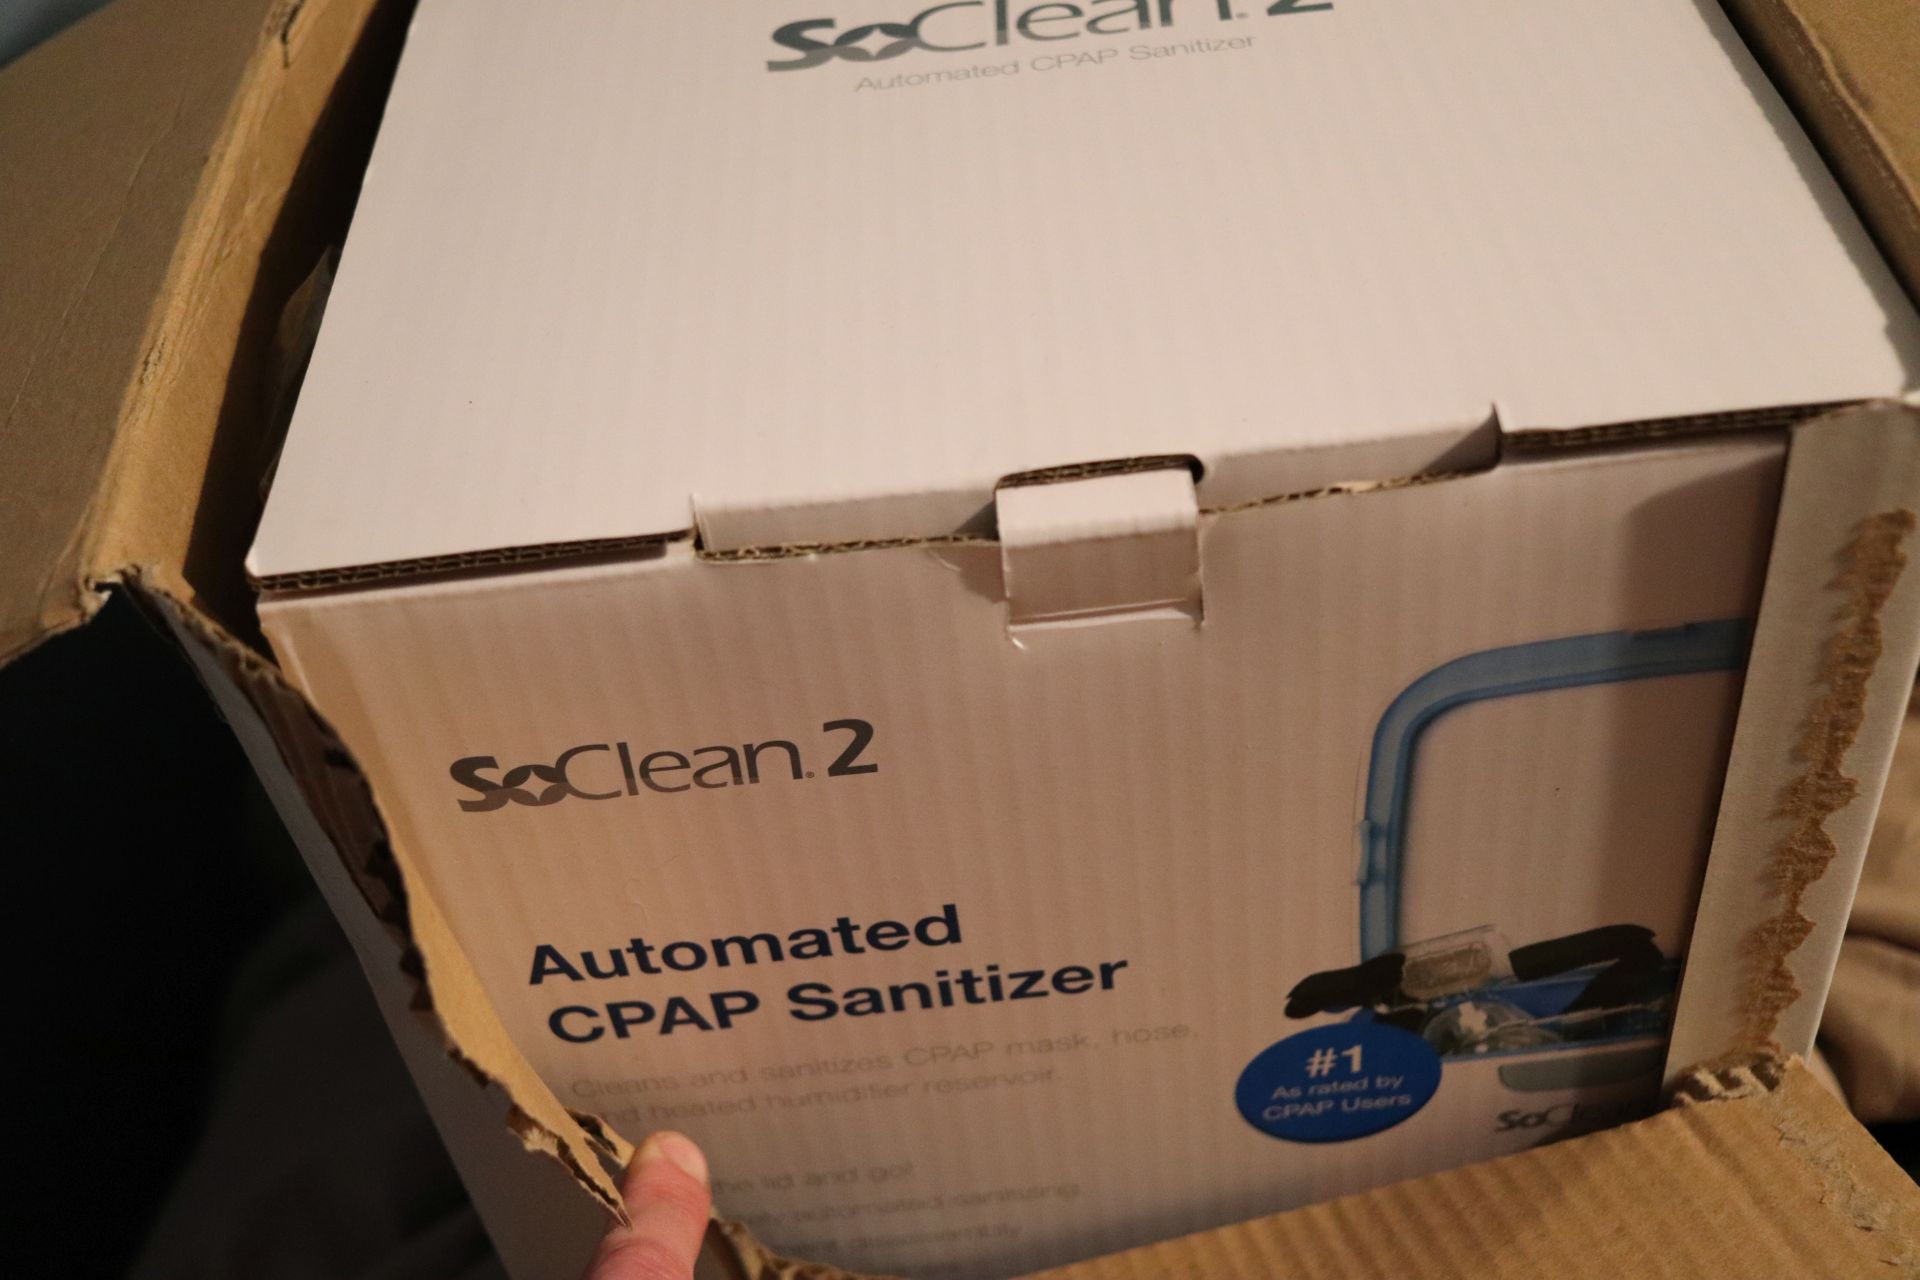 Respironics REMstar Pro CPAP Machine with Soclean 2 Automated CPAP Sanitizer - Image 7 of 7